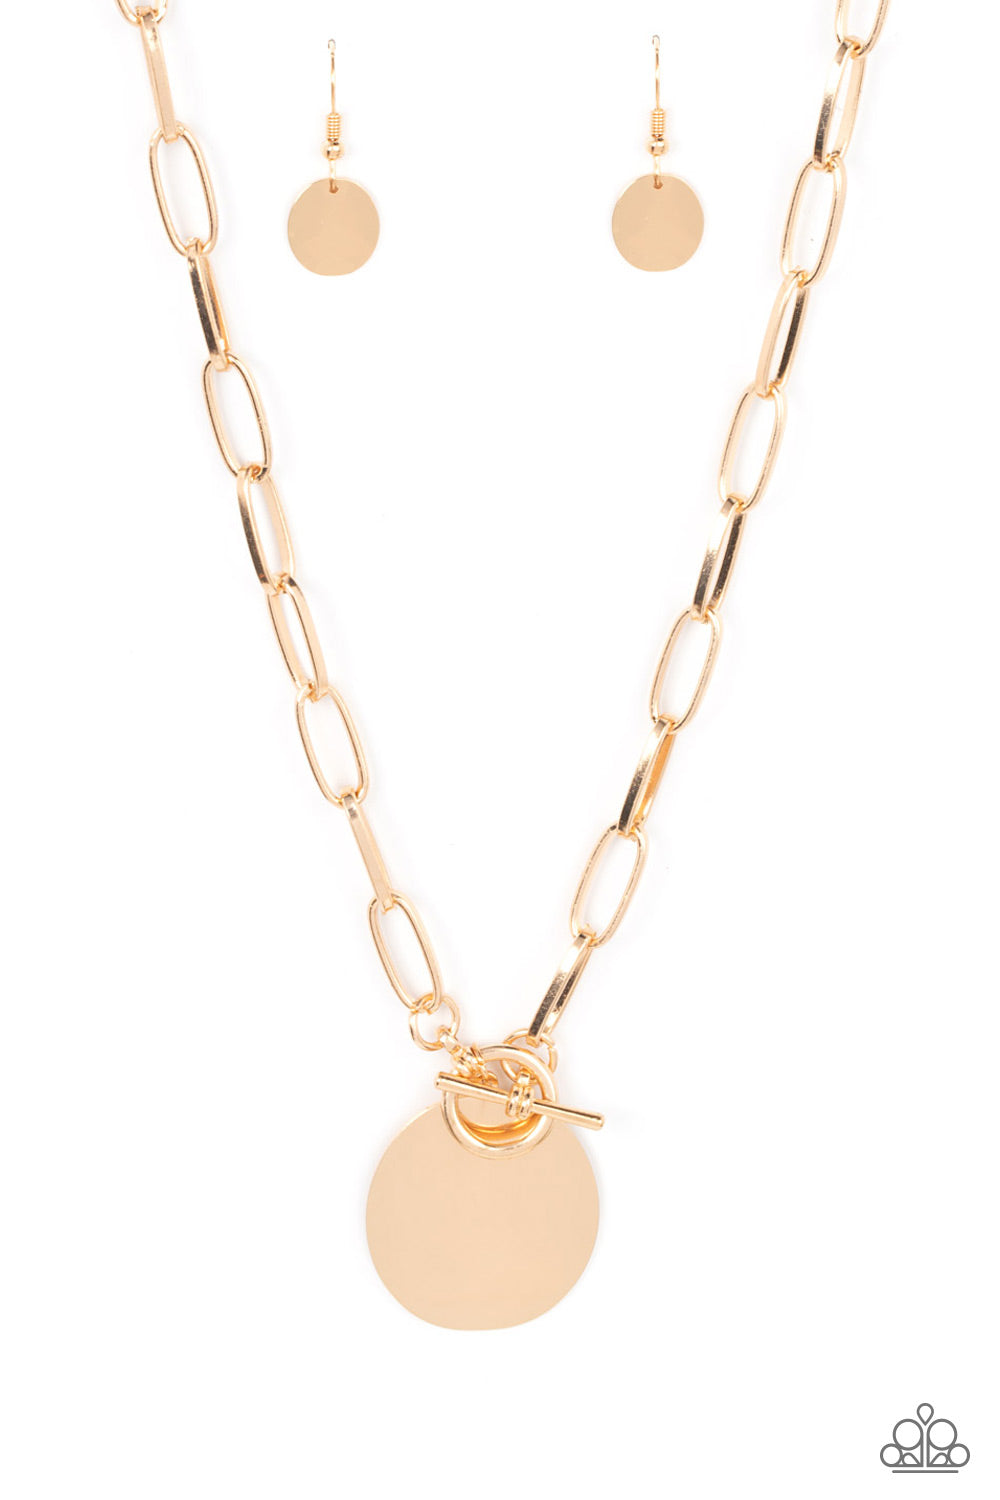 Tag Out - gold - Paparazzi necklace